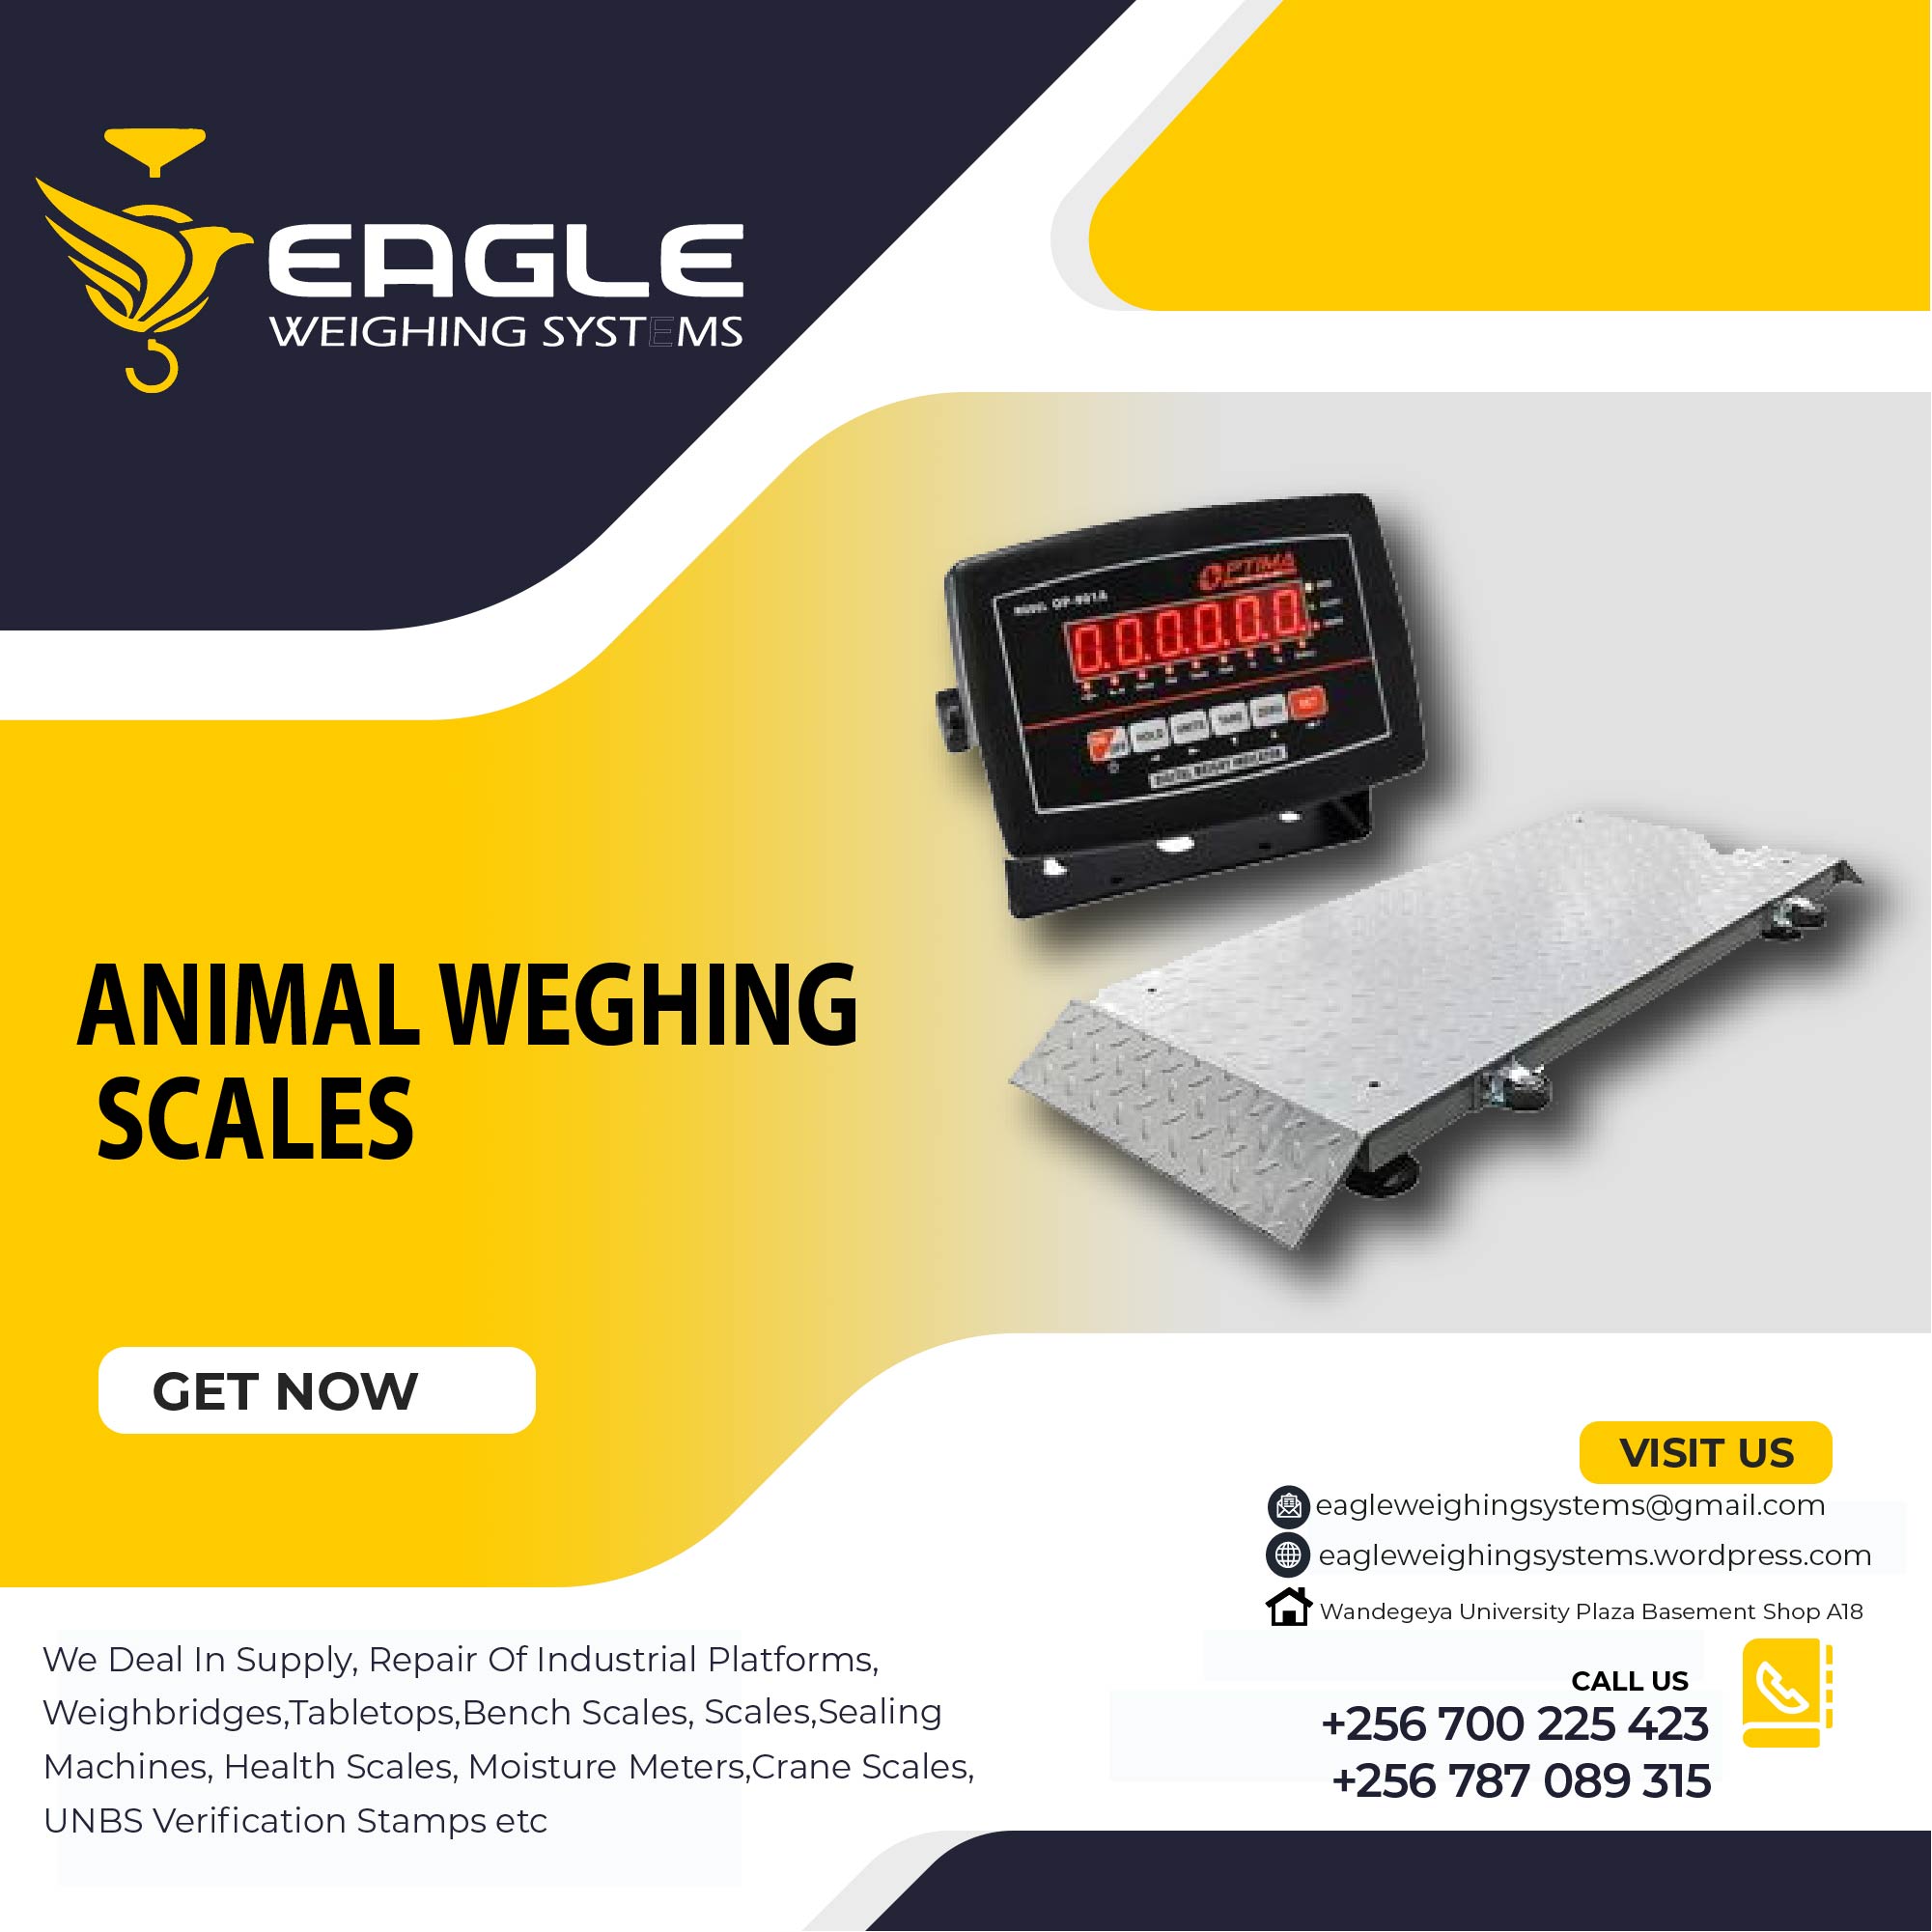 Animal Electronic floor weighing scale animal bench scales in Kampala Uganda, Kampala Central Division, Central, Uganda